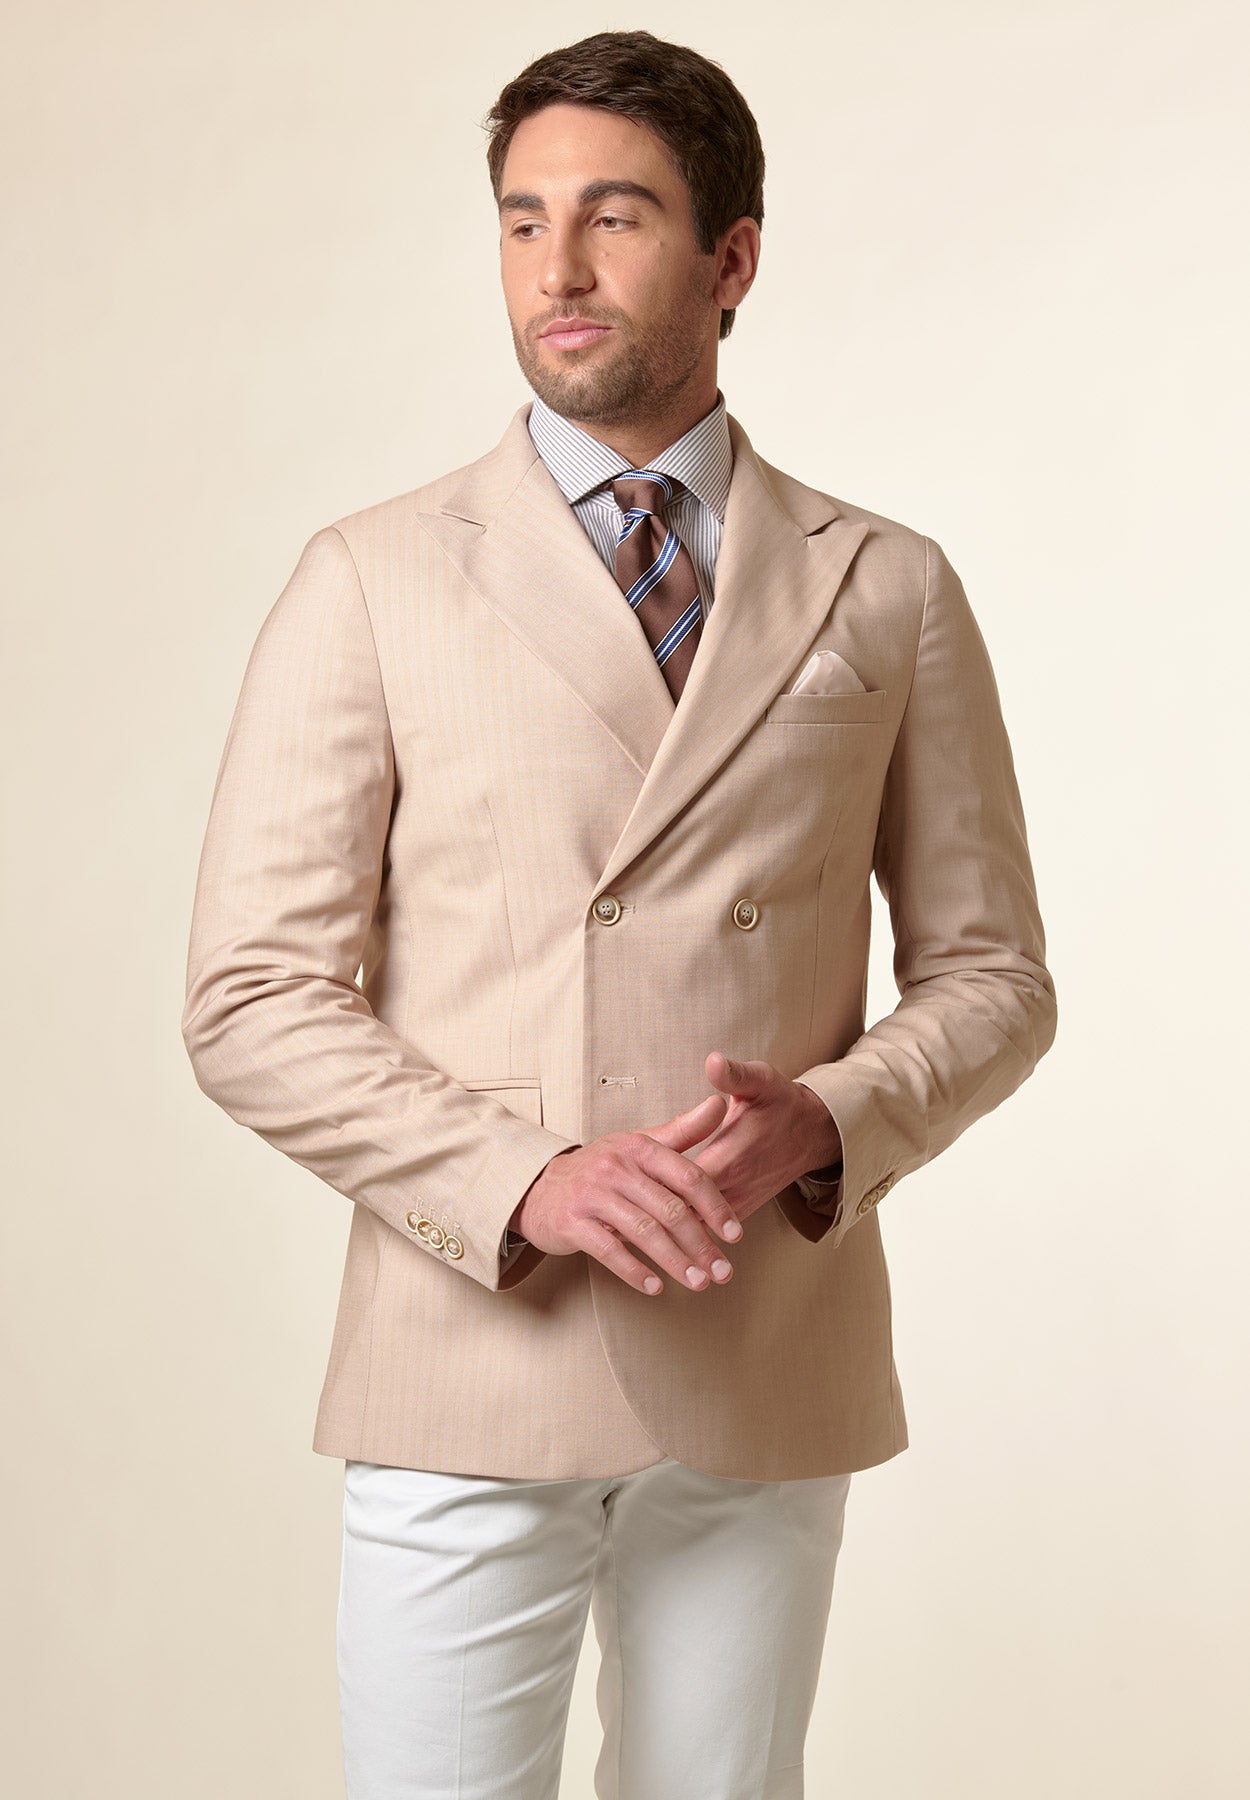 Resca double-breasted jacket